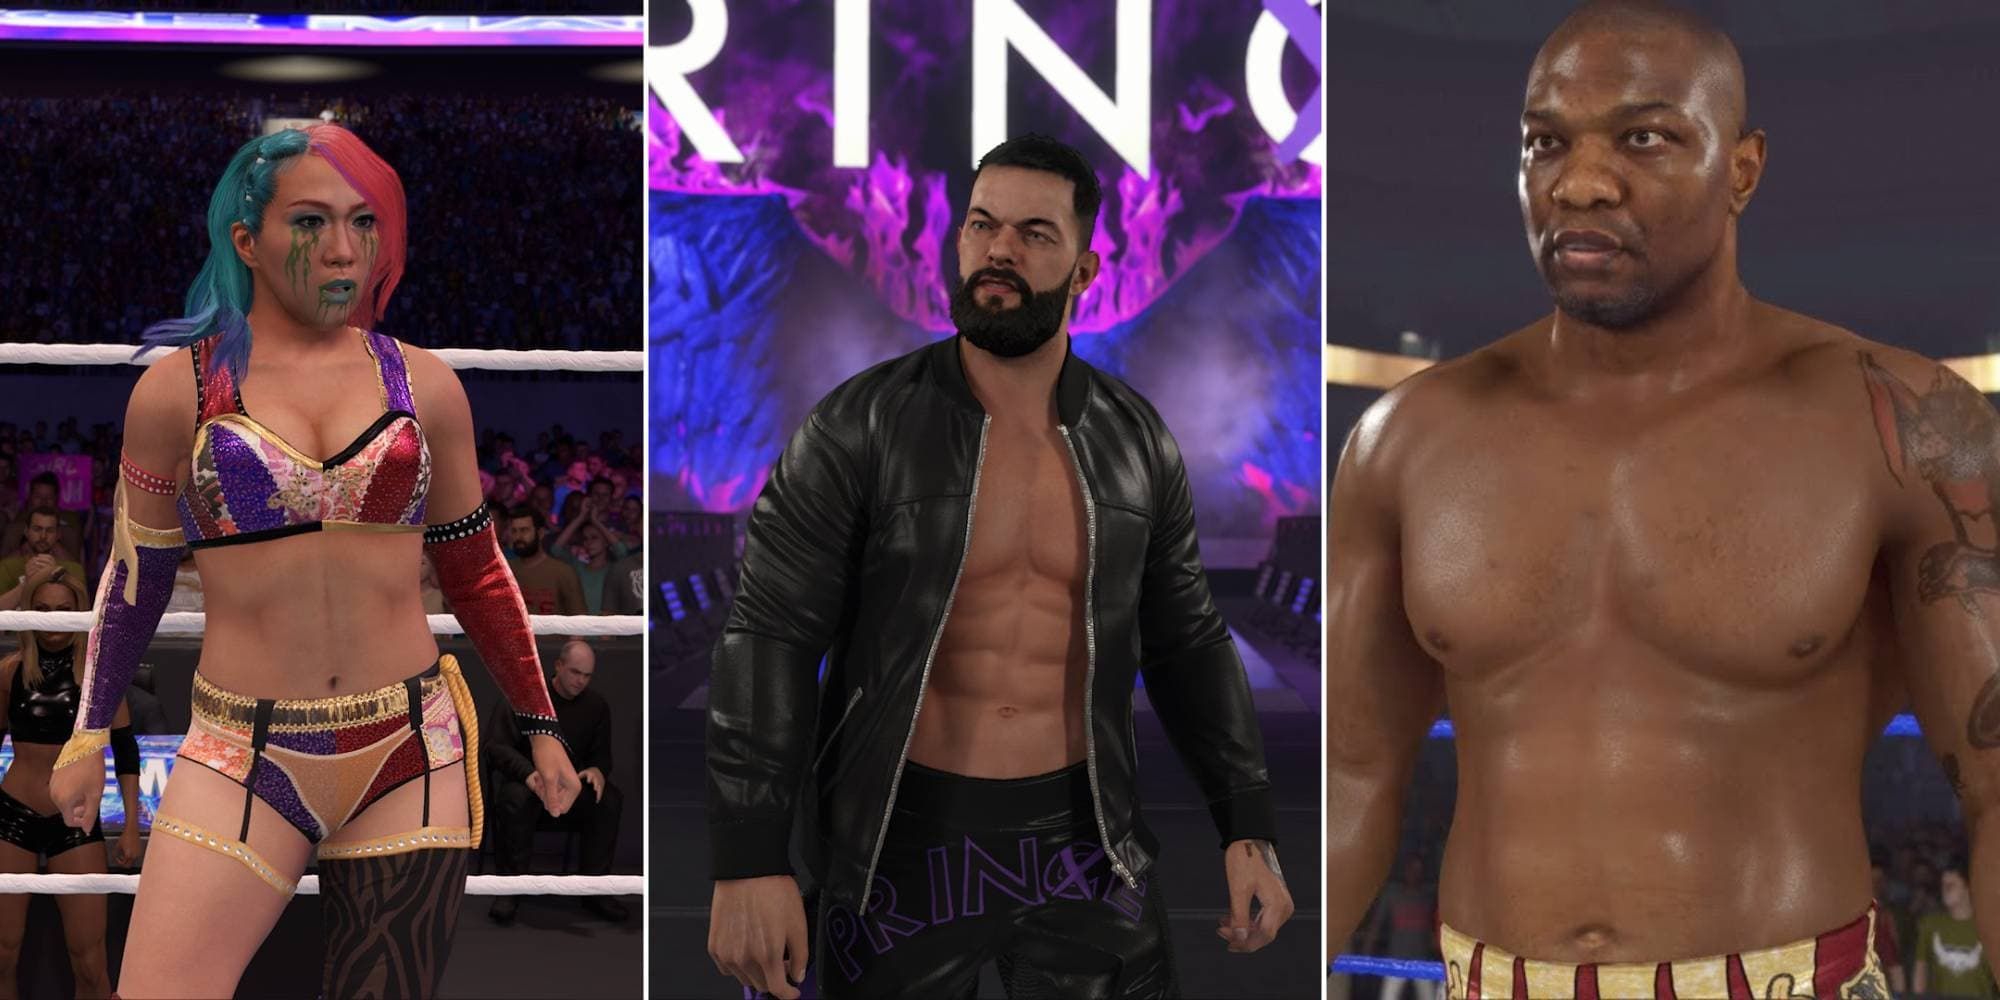 Asuka awaits her opponent, Finn Balor makes his entrance, and Shelton Benjamin stands in the ring in WWE 2K23.